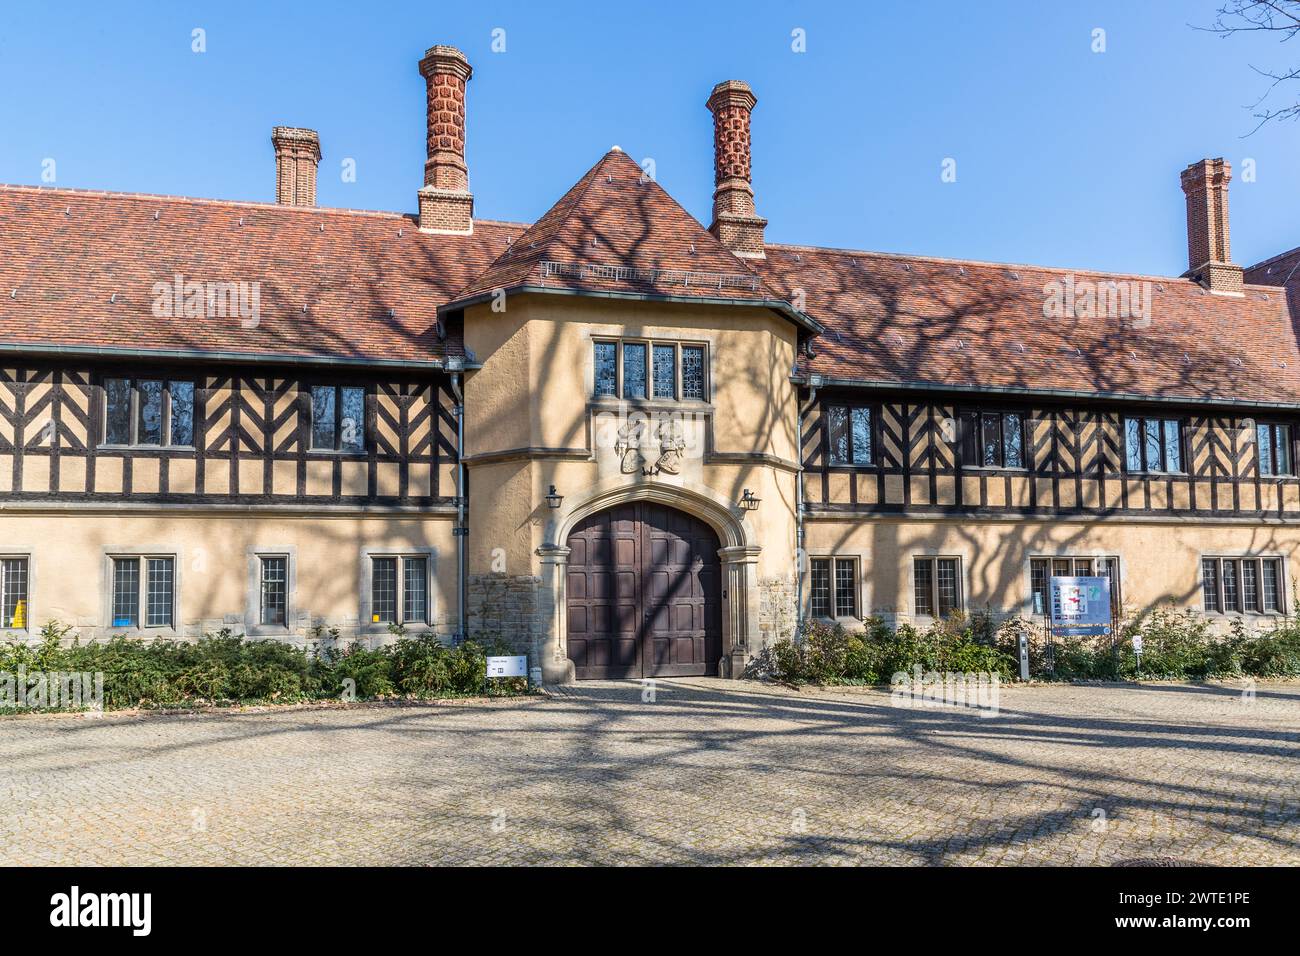 Cecilienhof Palace was the venue for the conference of the Allied Powers after the Second World War. Ökonomieweg, Potsdam, Brandenburg, Brandenburg, Germany Stock Photo